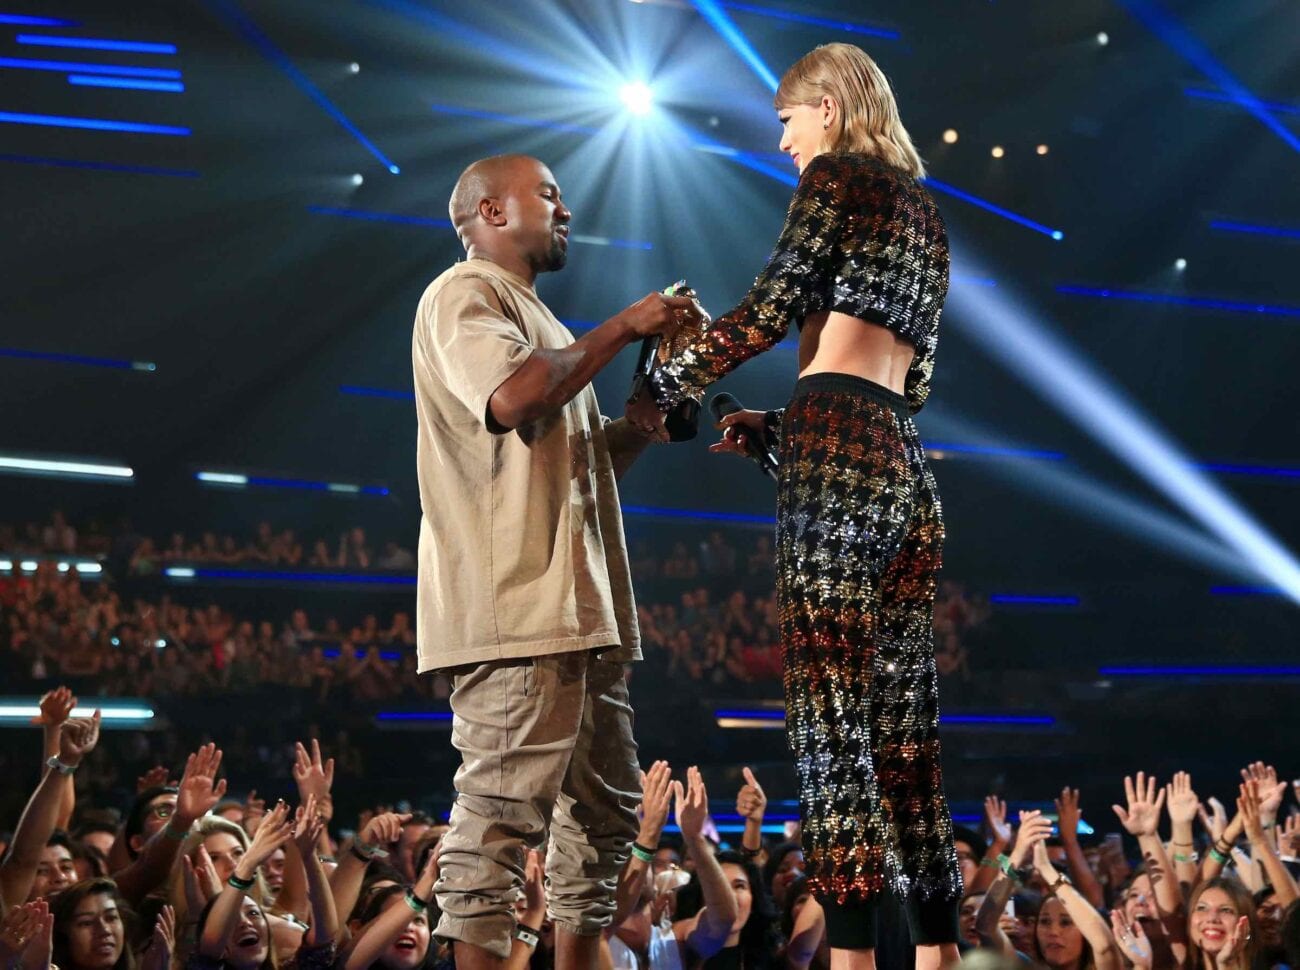 It’s a pop culture saga for the ages: the Taylor Swift vs. Kanye West feud. Here’s a timeline of every major event in the Swift/West feud so far.